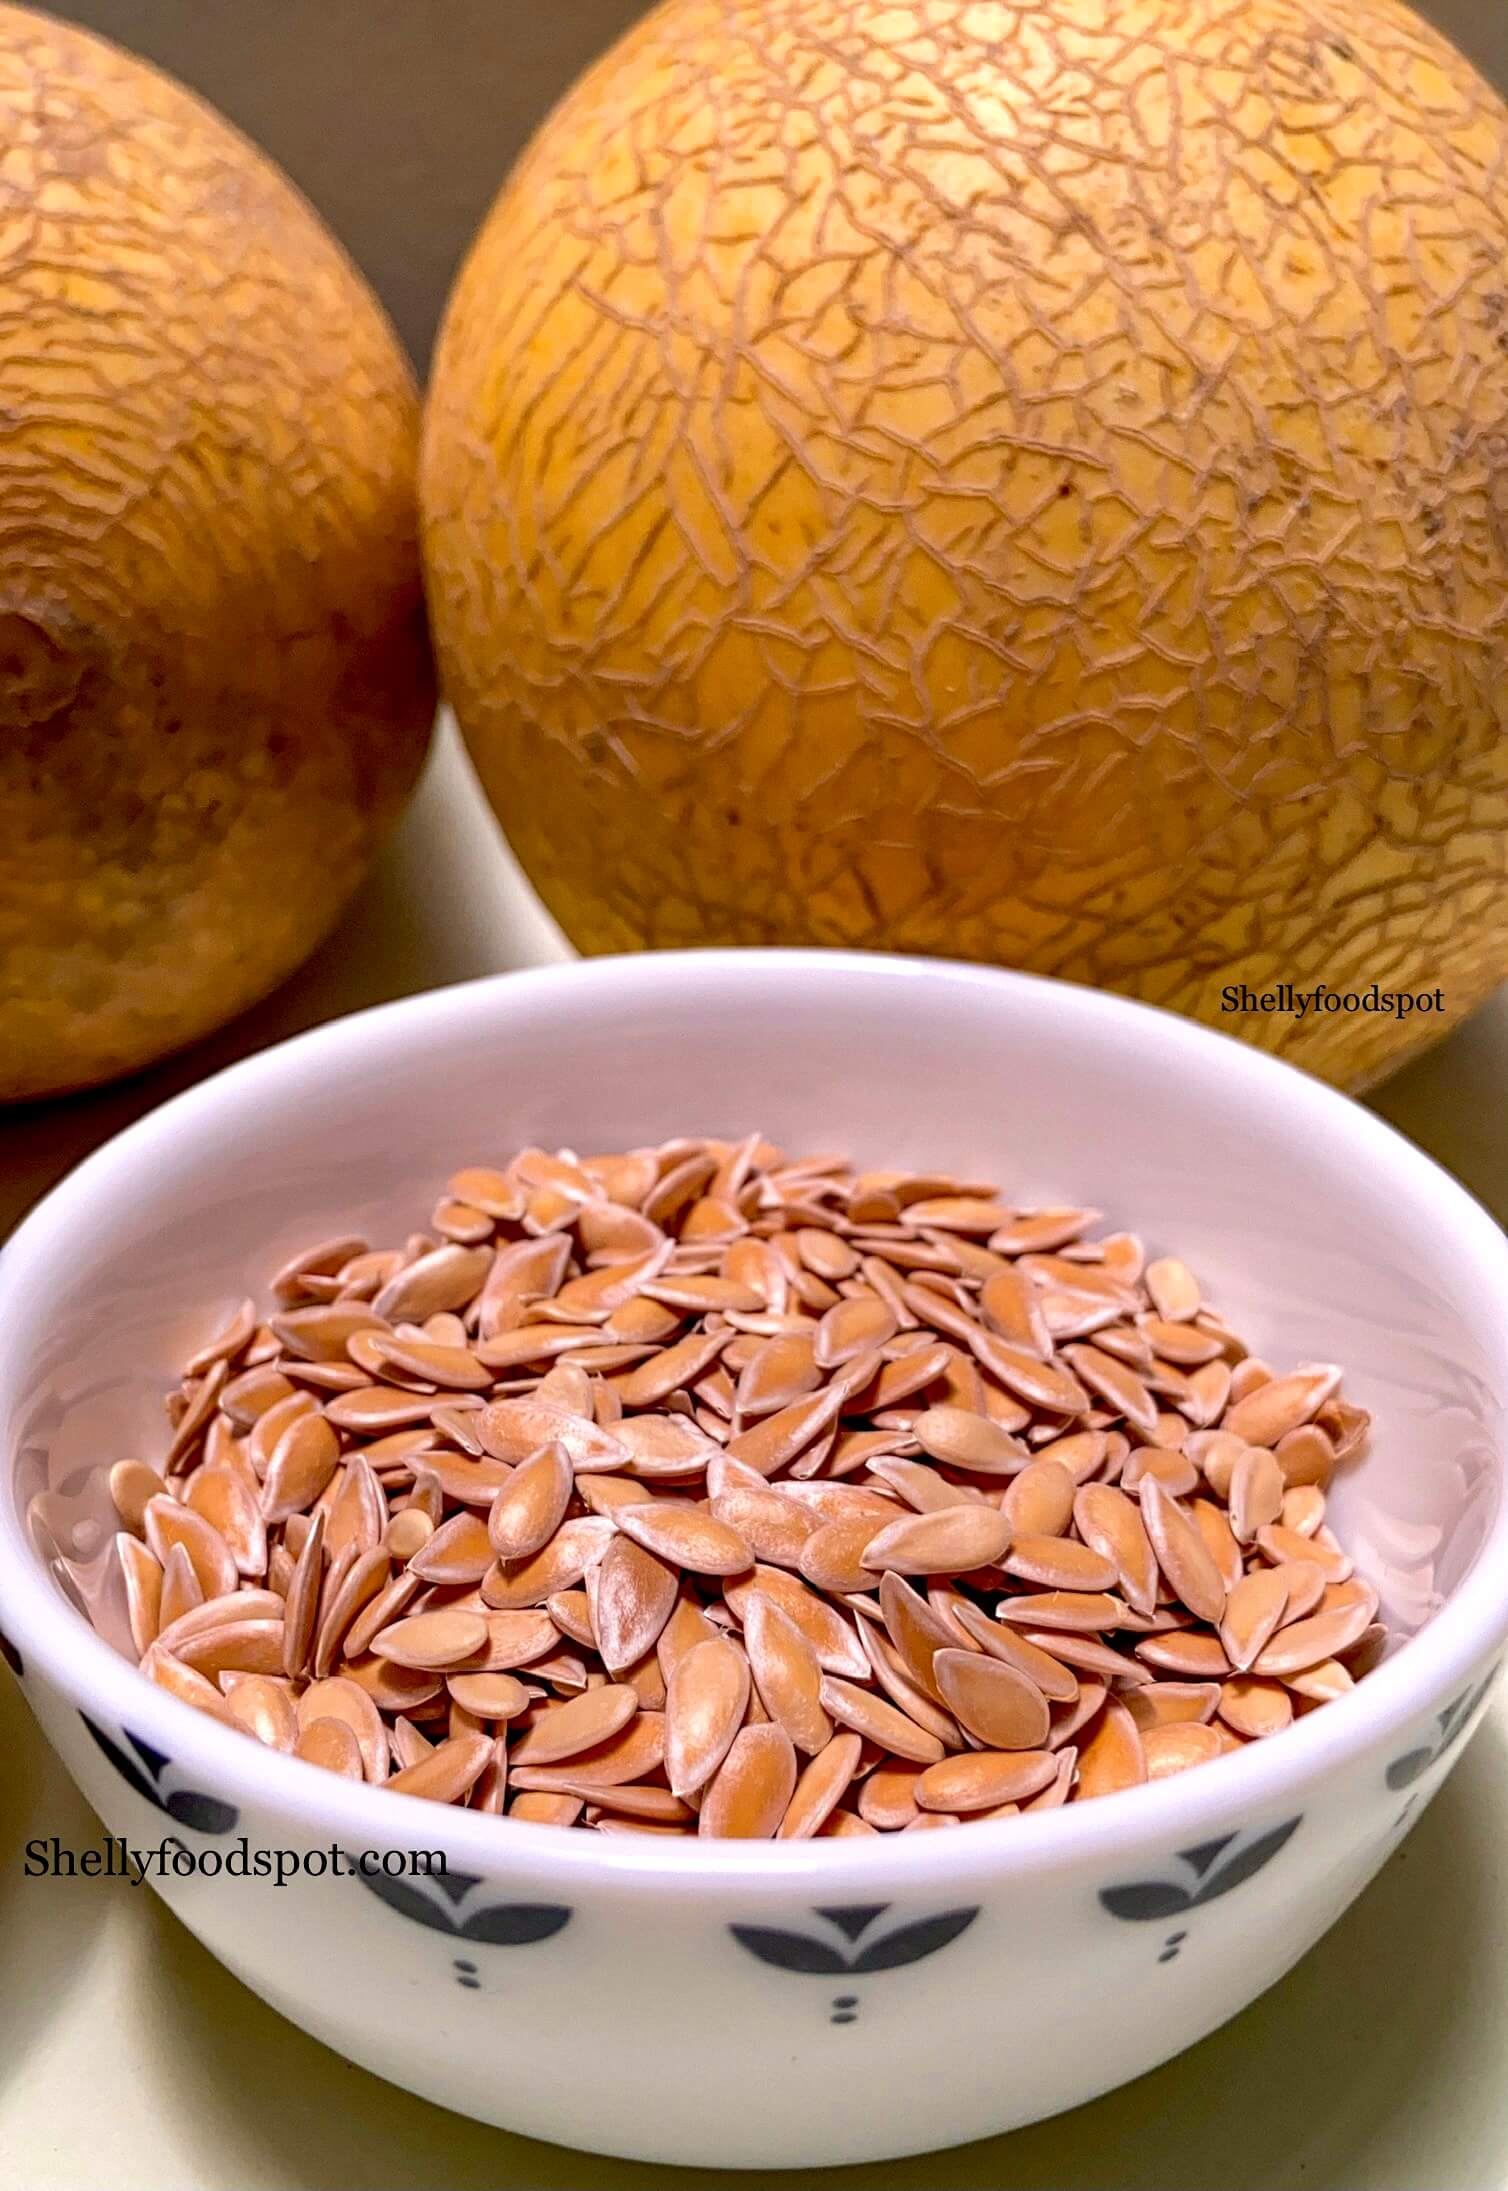 How to dry muskmelon seeds to eat